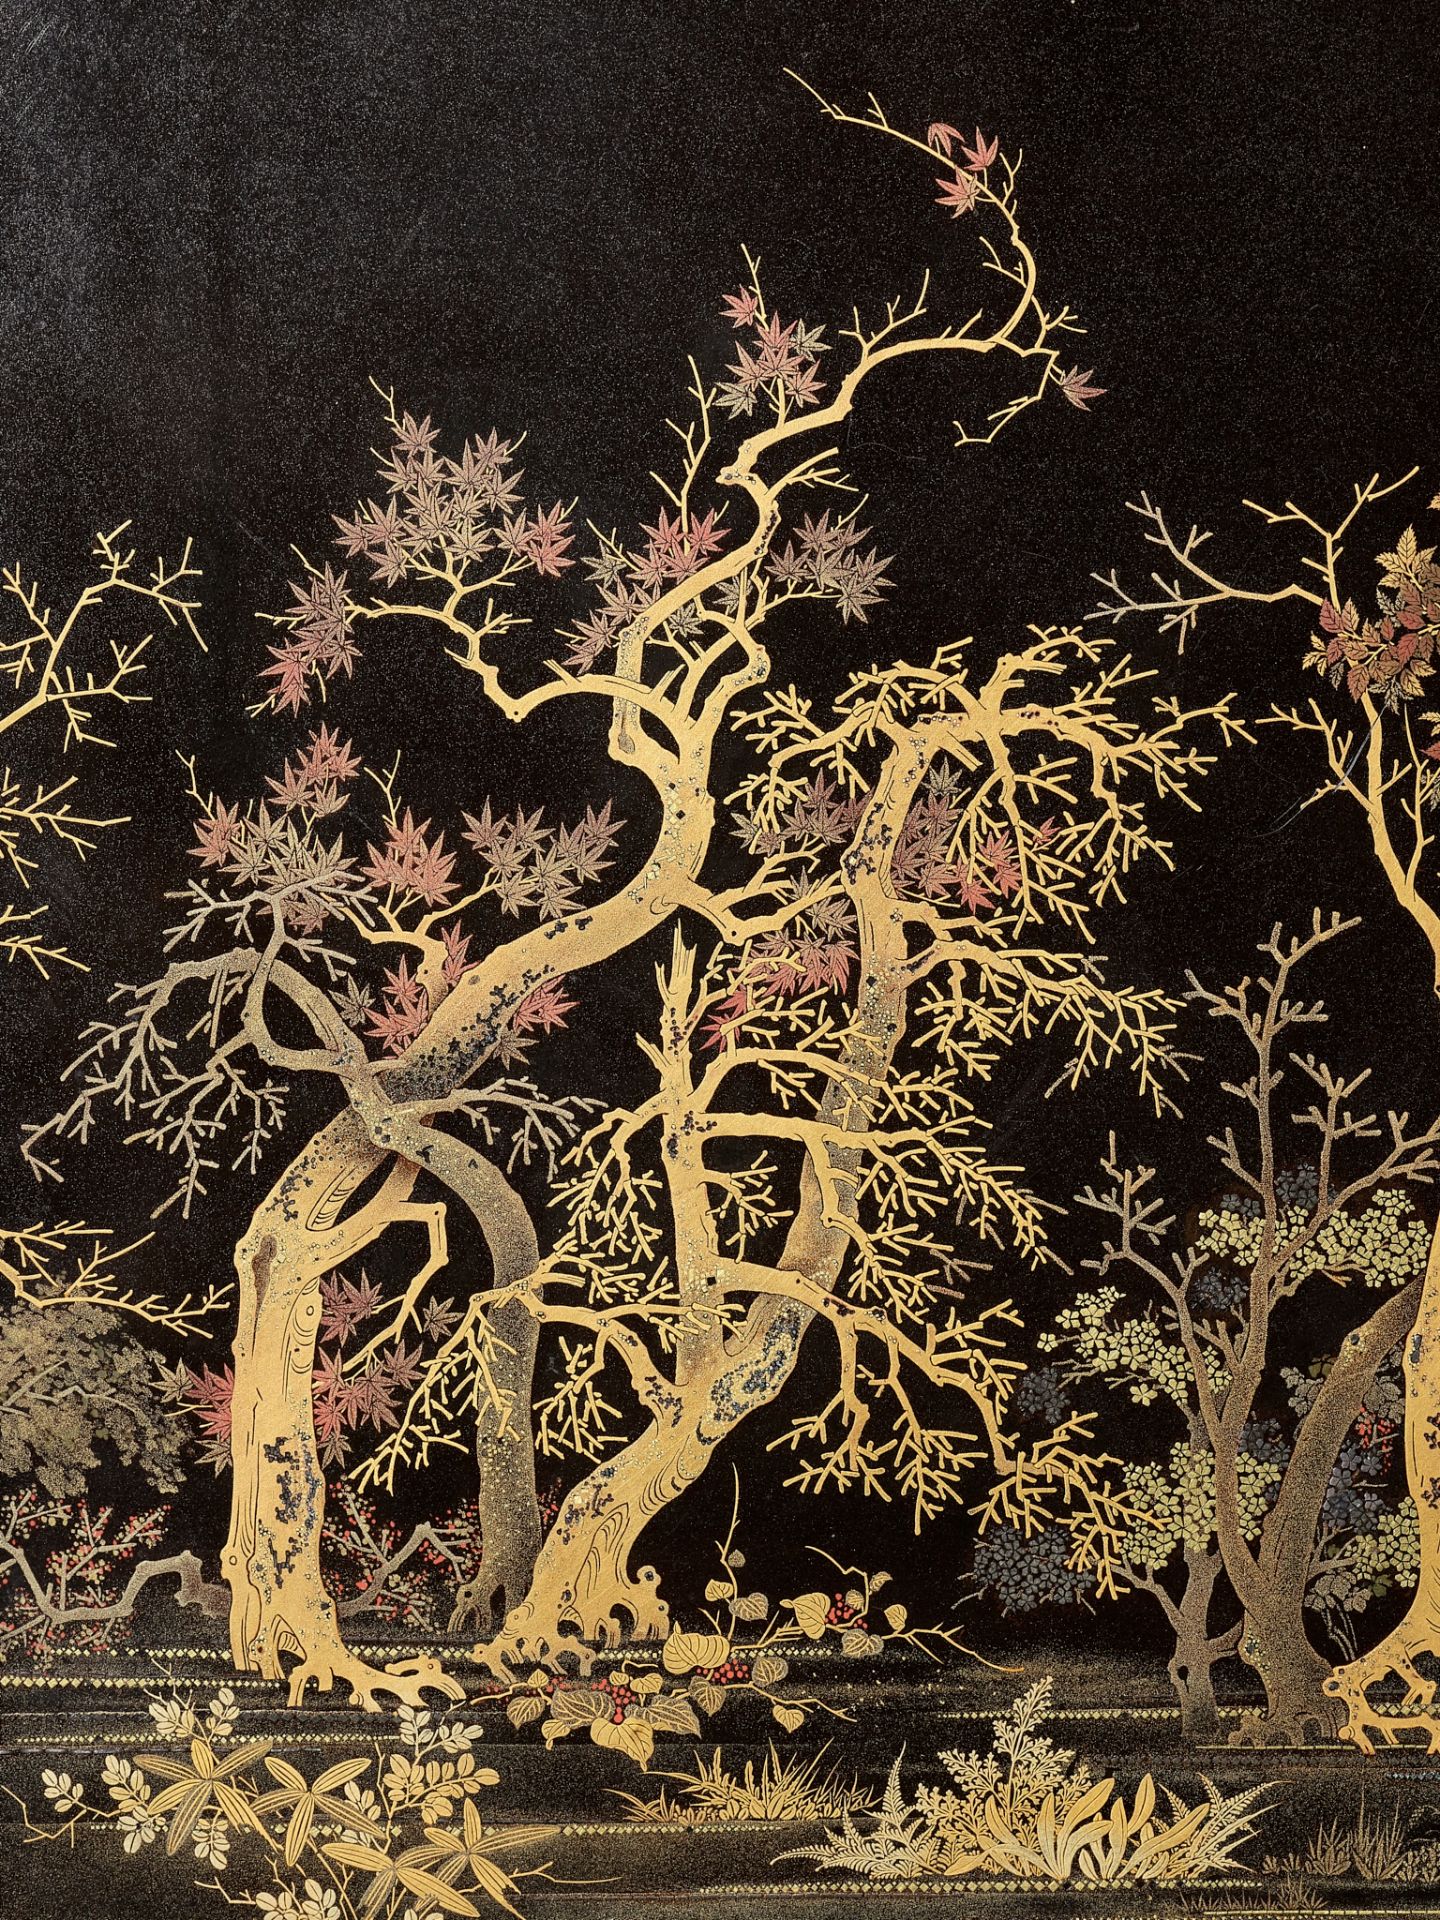 A SUPERB LACQUER SUZURIBAKO (WRITING BOX) DEPICTING A MOONLIT FOREST - Image 10 of 15